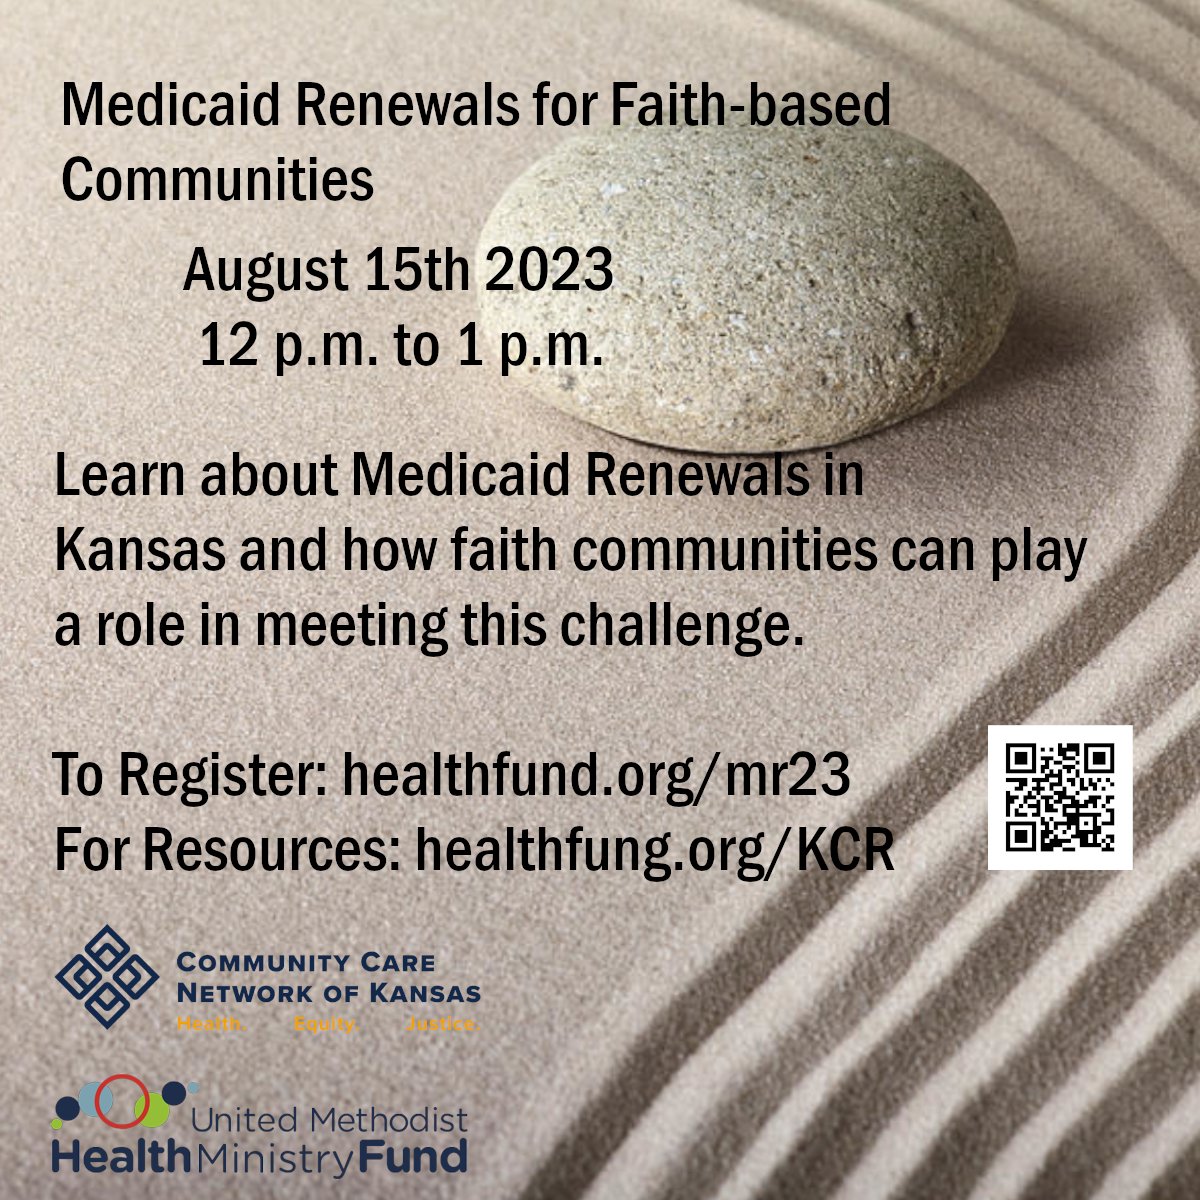 The Health Fund and Community Care Network of Kansas are hosting a webinar for faith-based communities regarding Medicaid renewals in Kansas. Join us this Tuesday, August 15 at noon. Register at healthfund.org/MR23